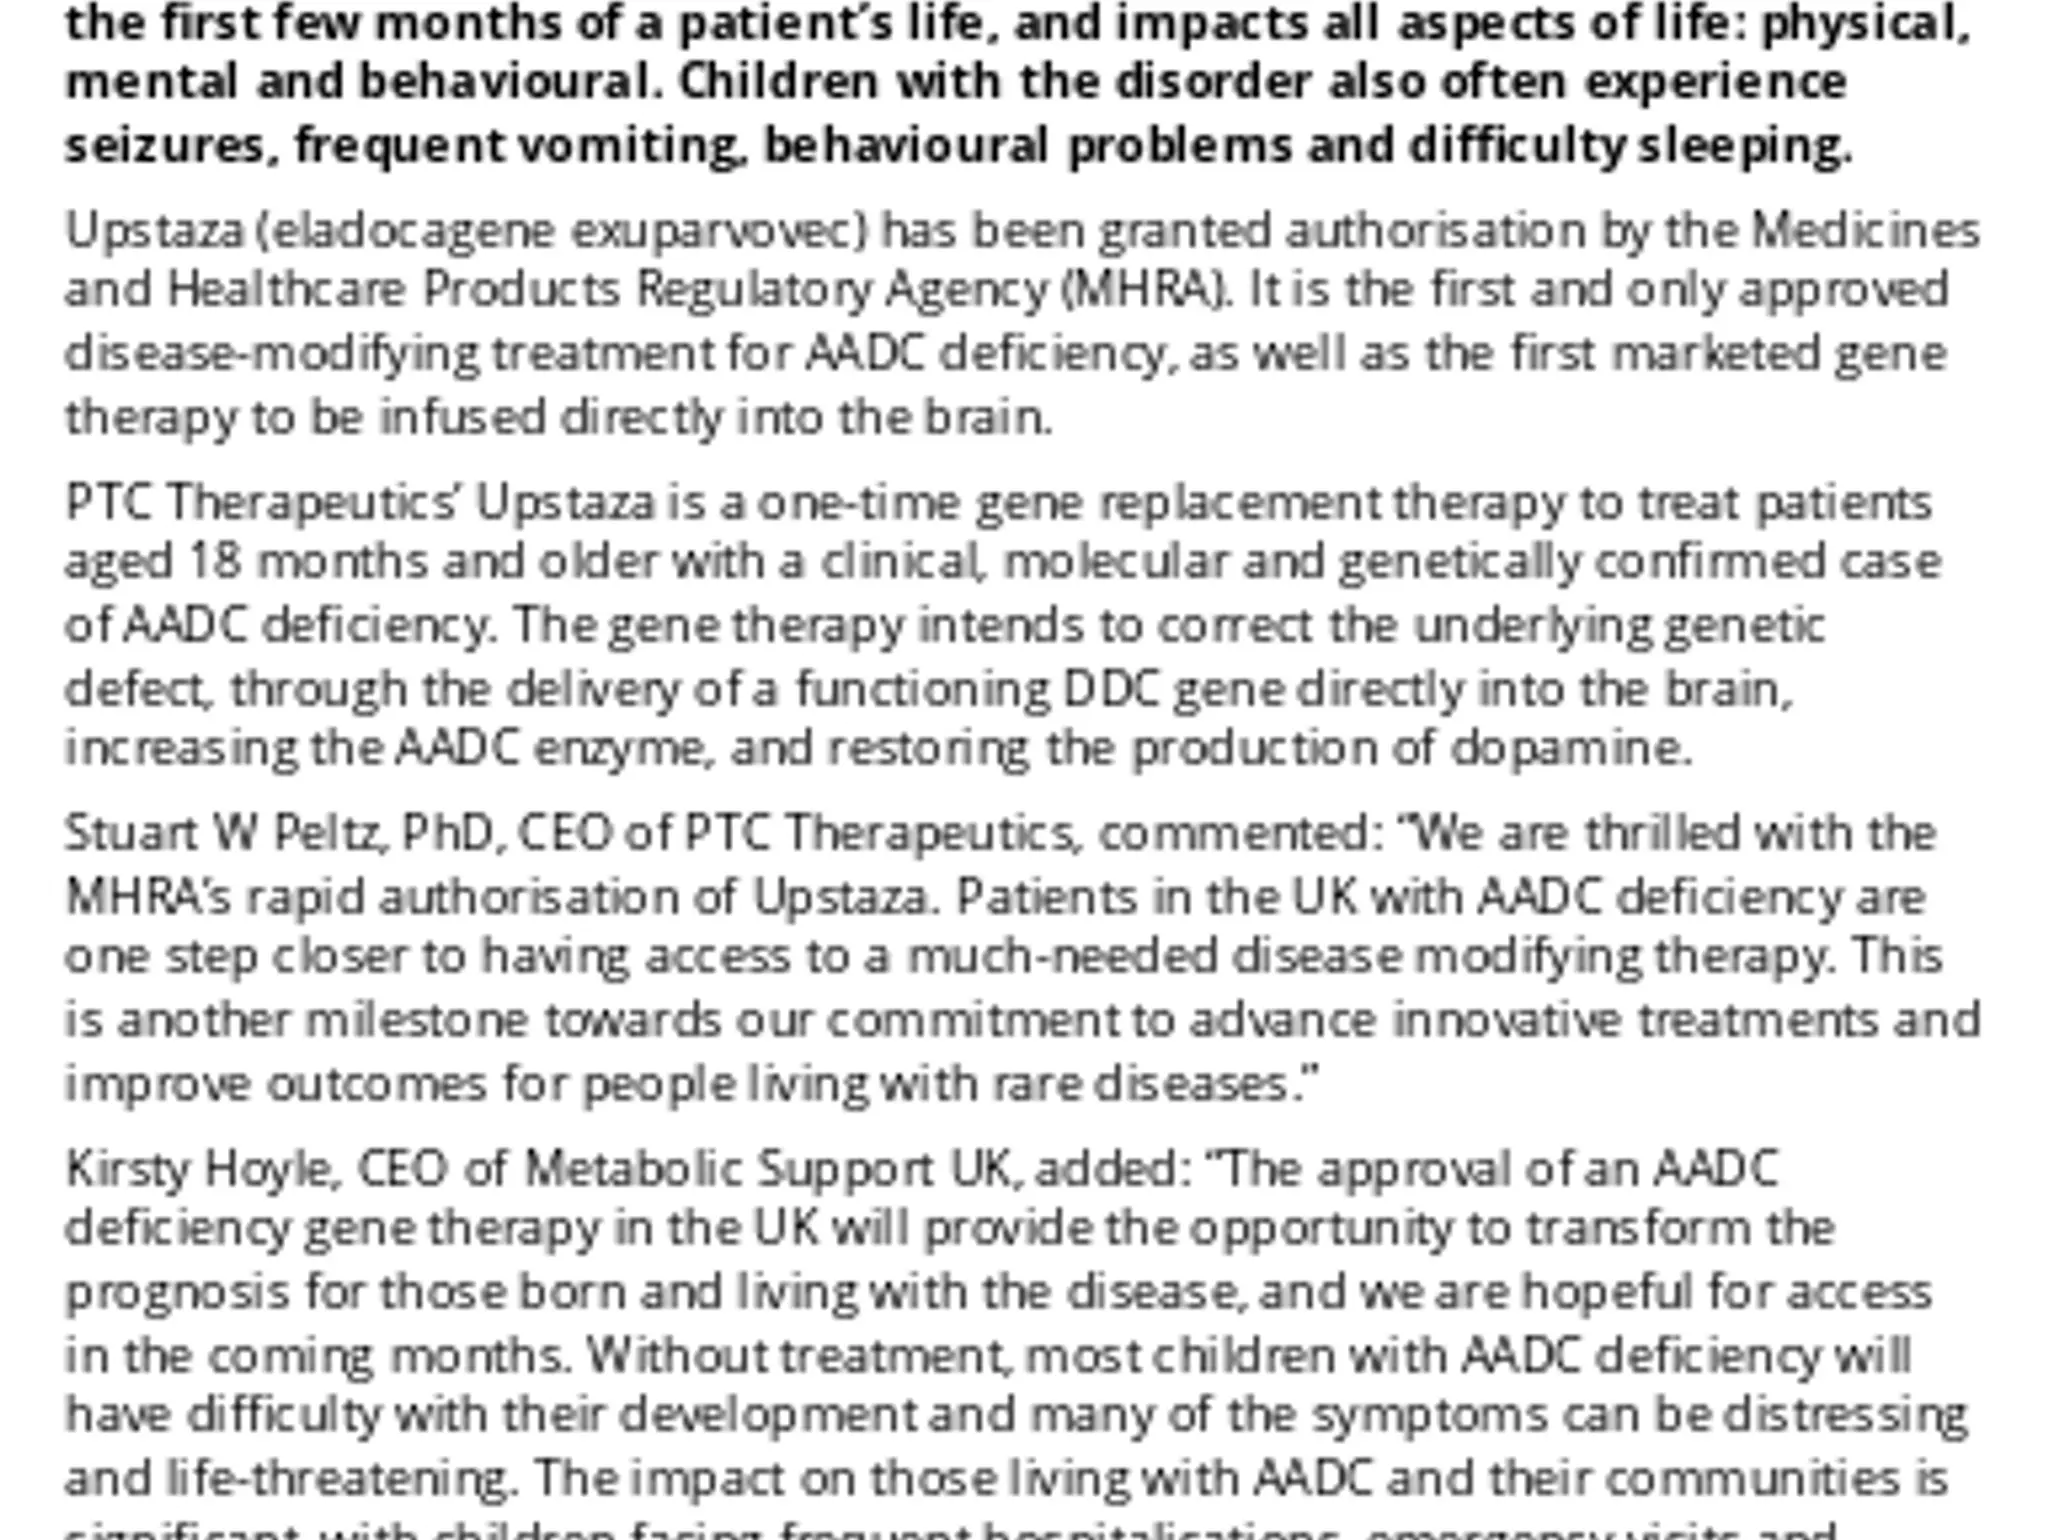 Upstaza Given Marketing Authorisation For AADC Deficiency By MHRA